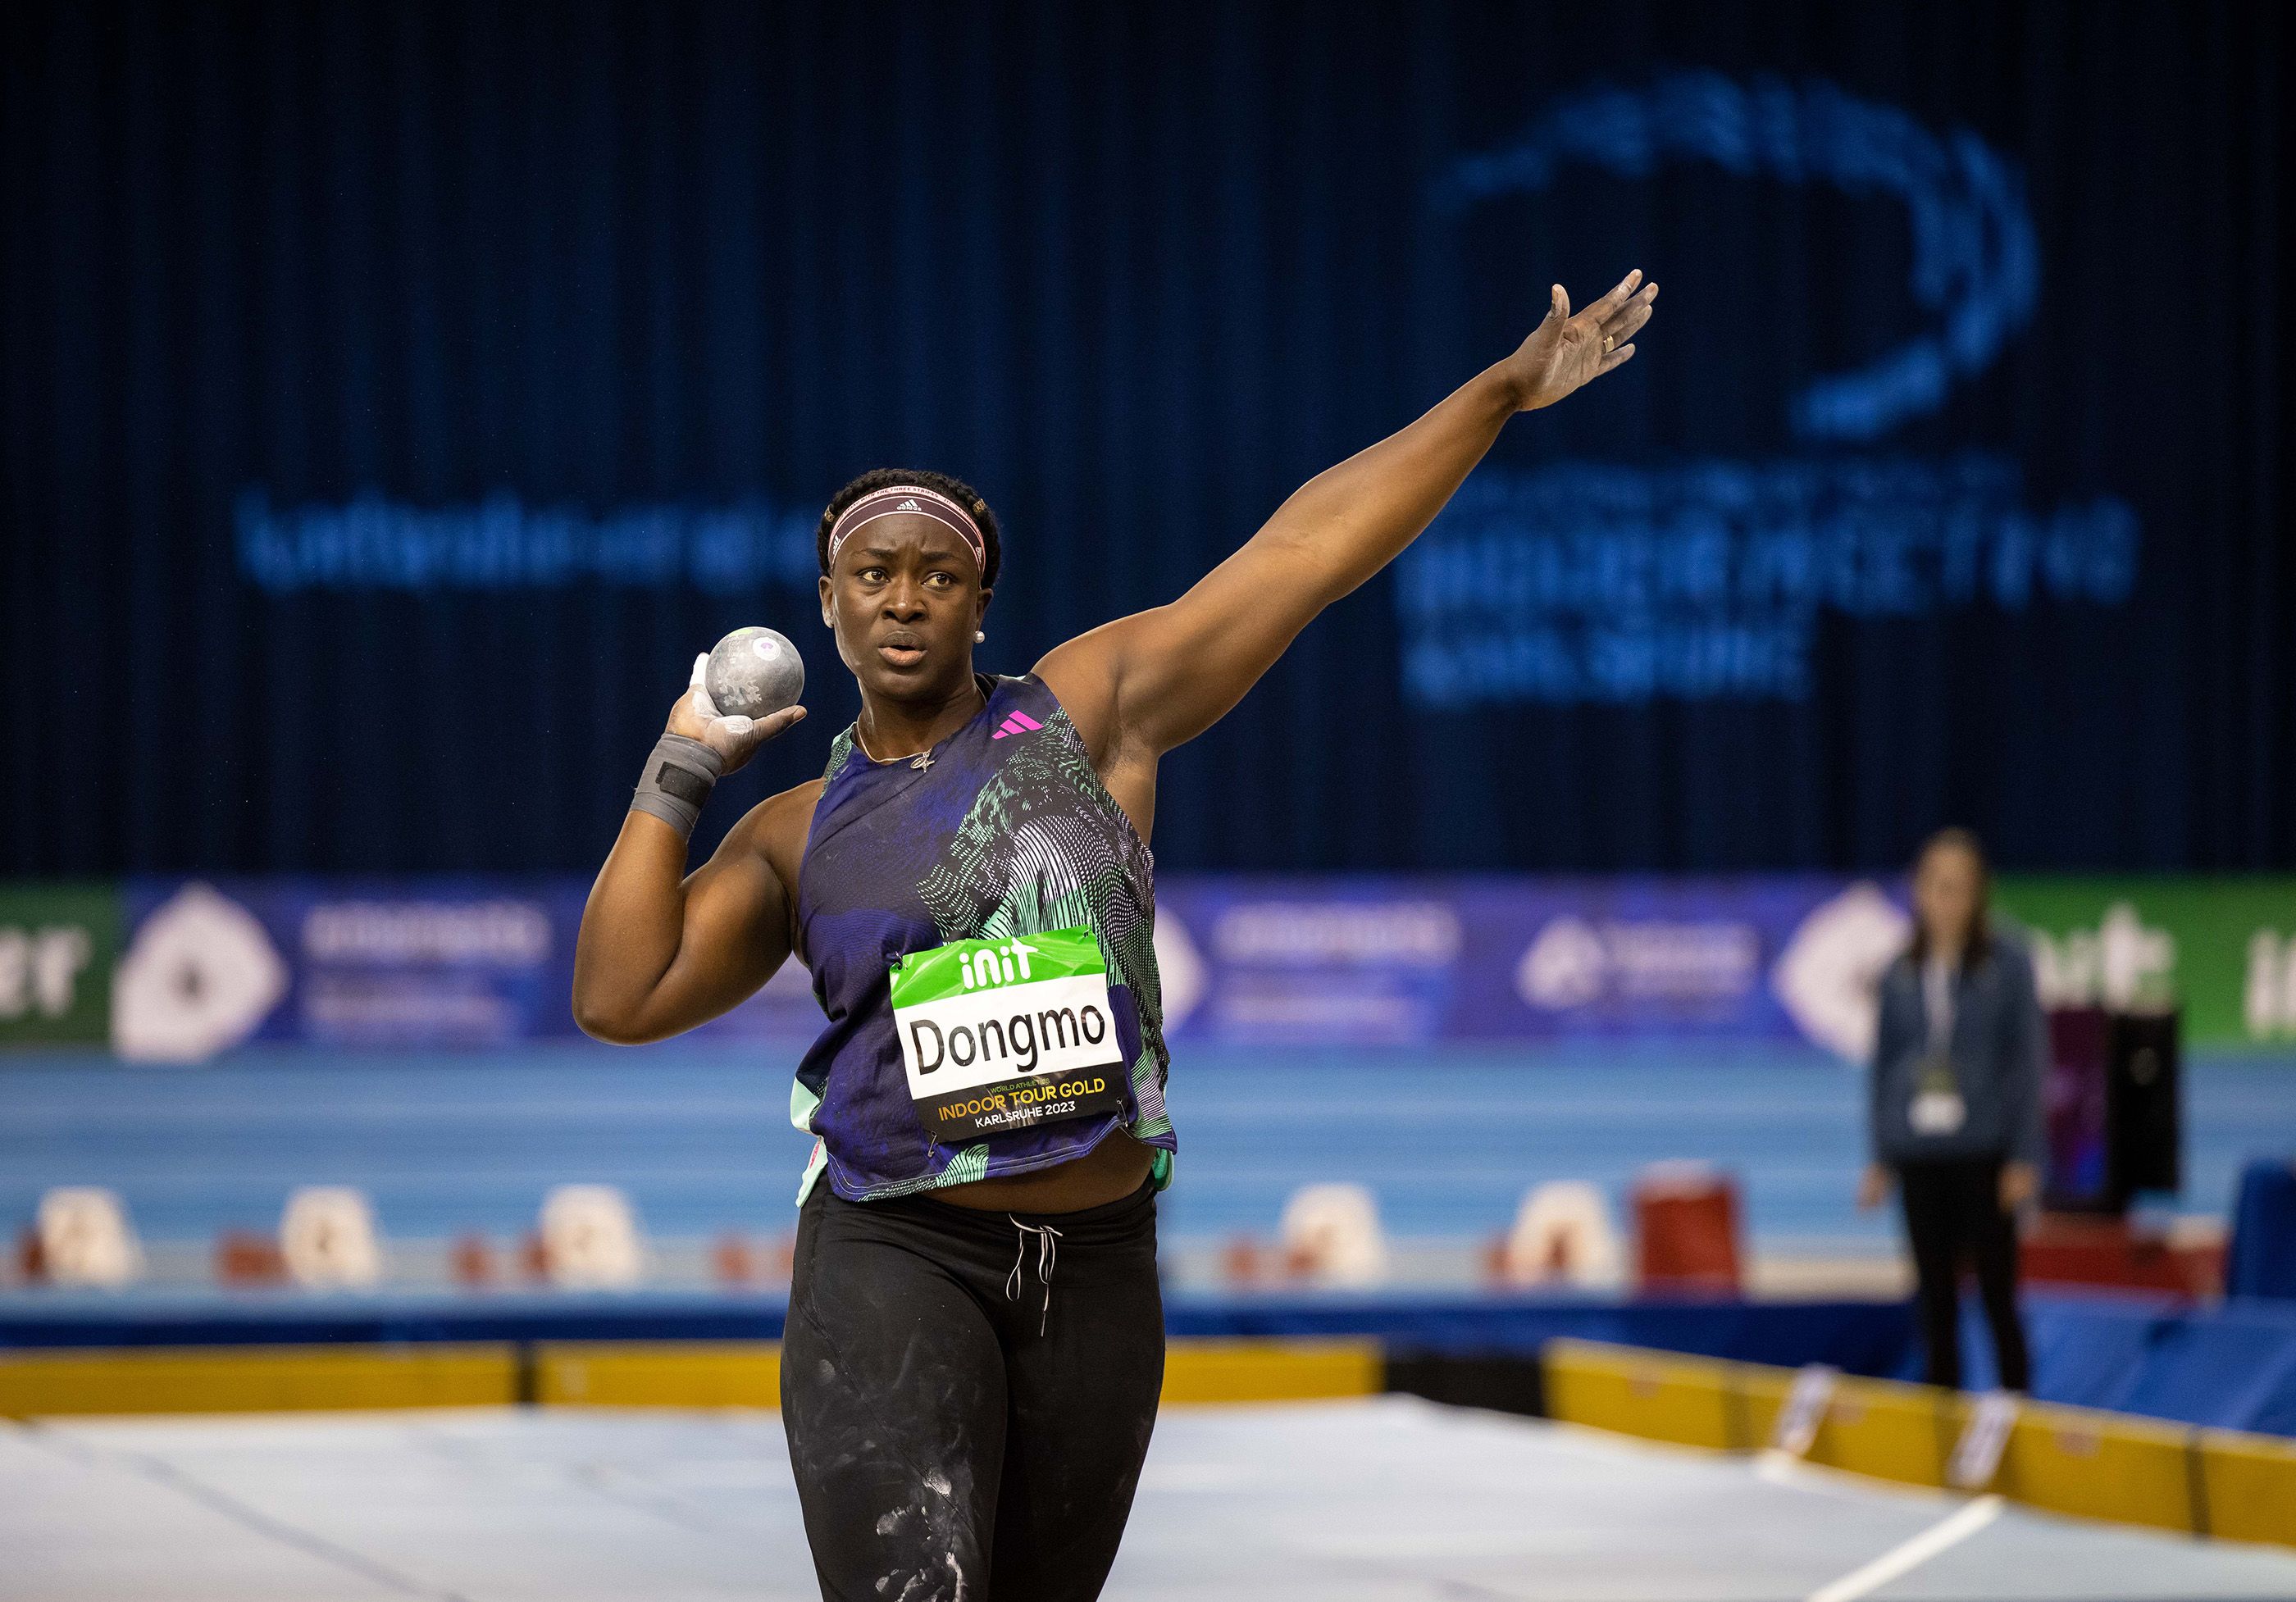 Shot put winner Auriol Dongmo in action at the World Indoor Tour Gold meeting in Karlsruhe